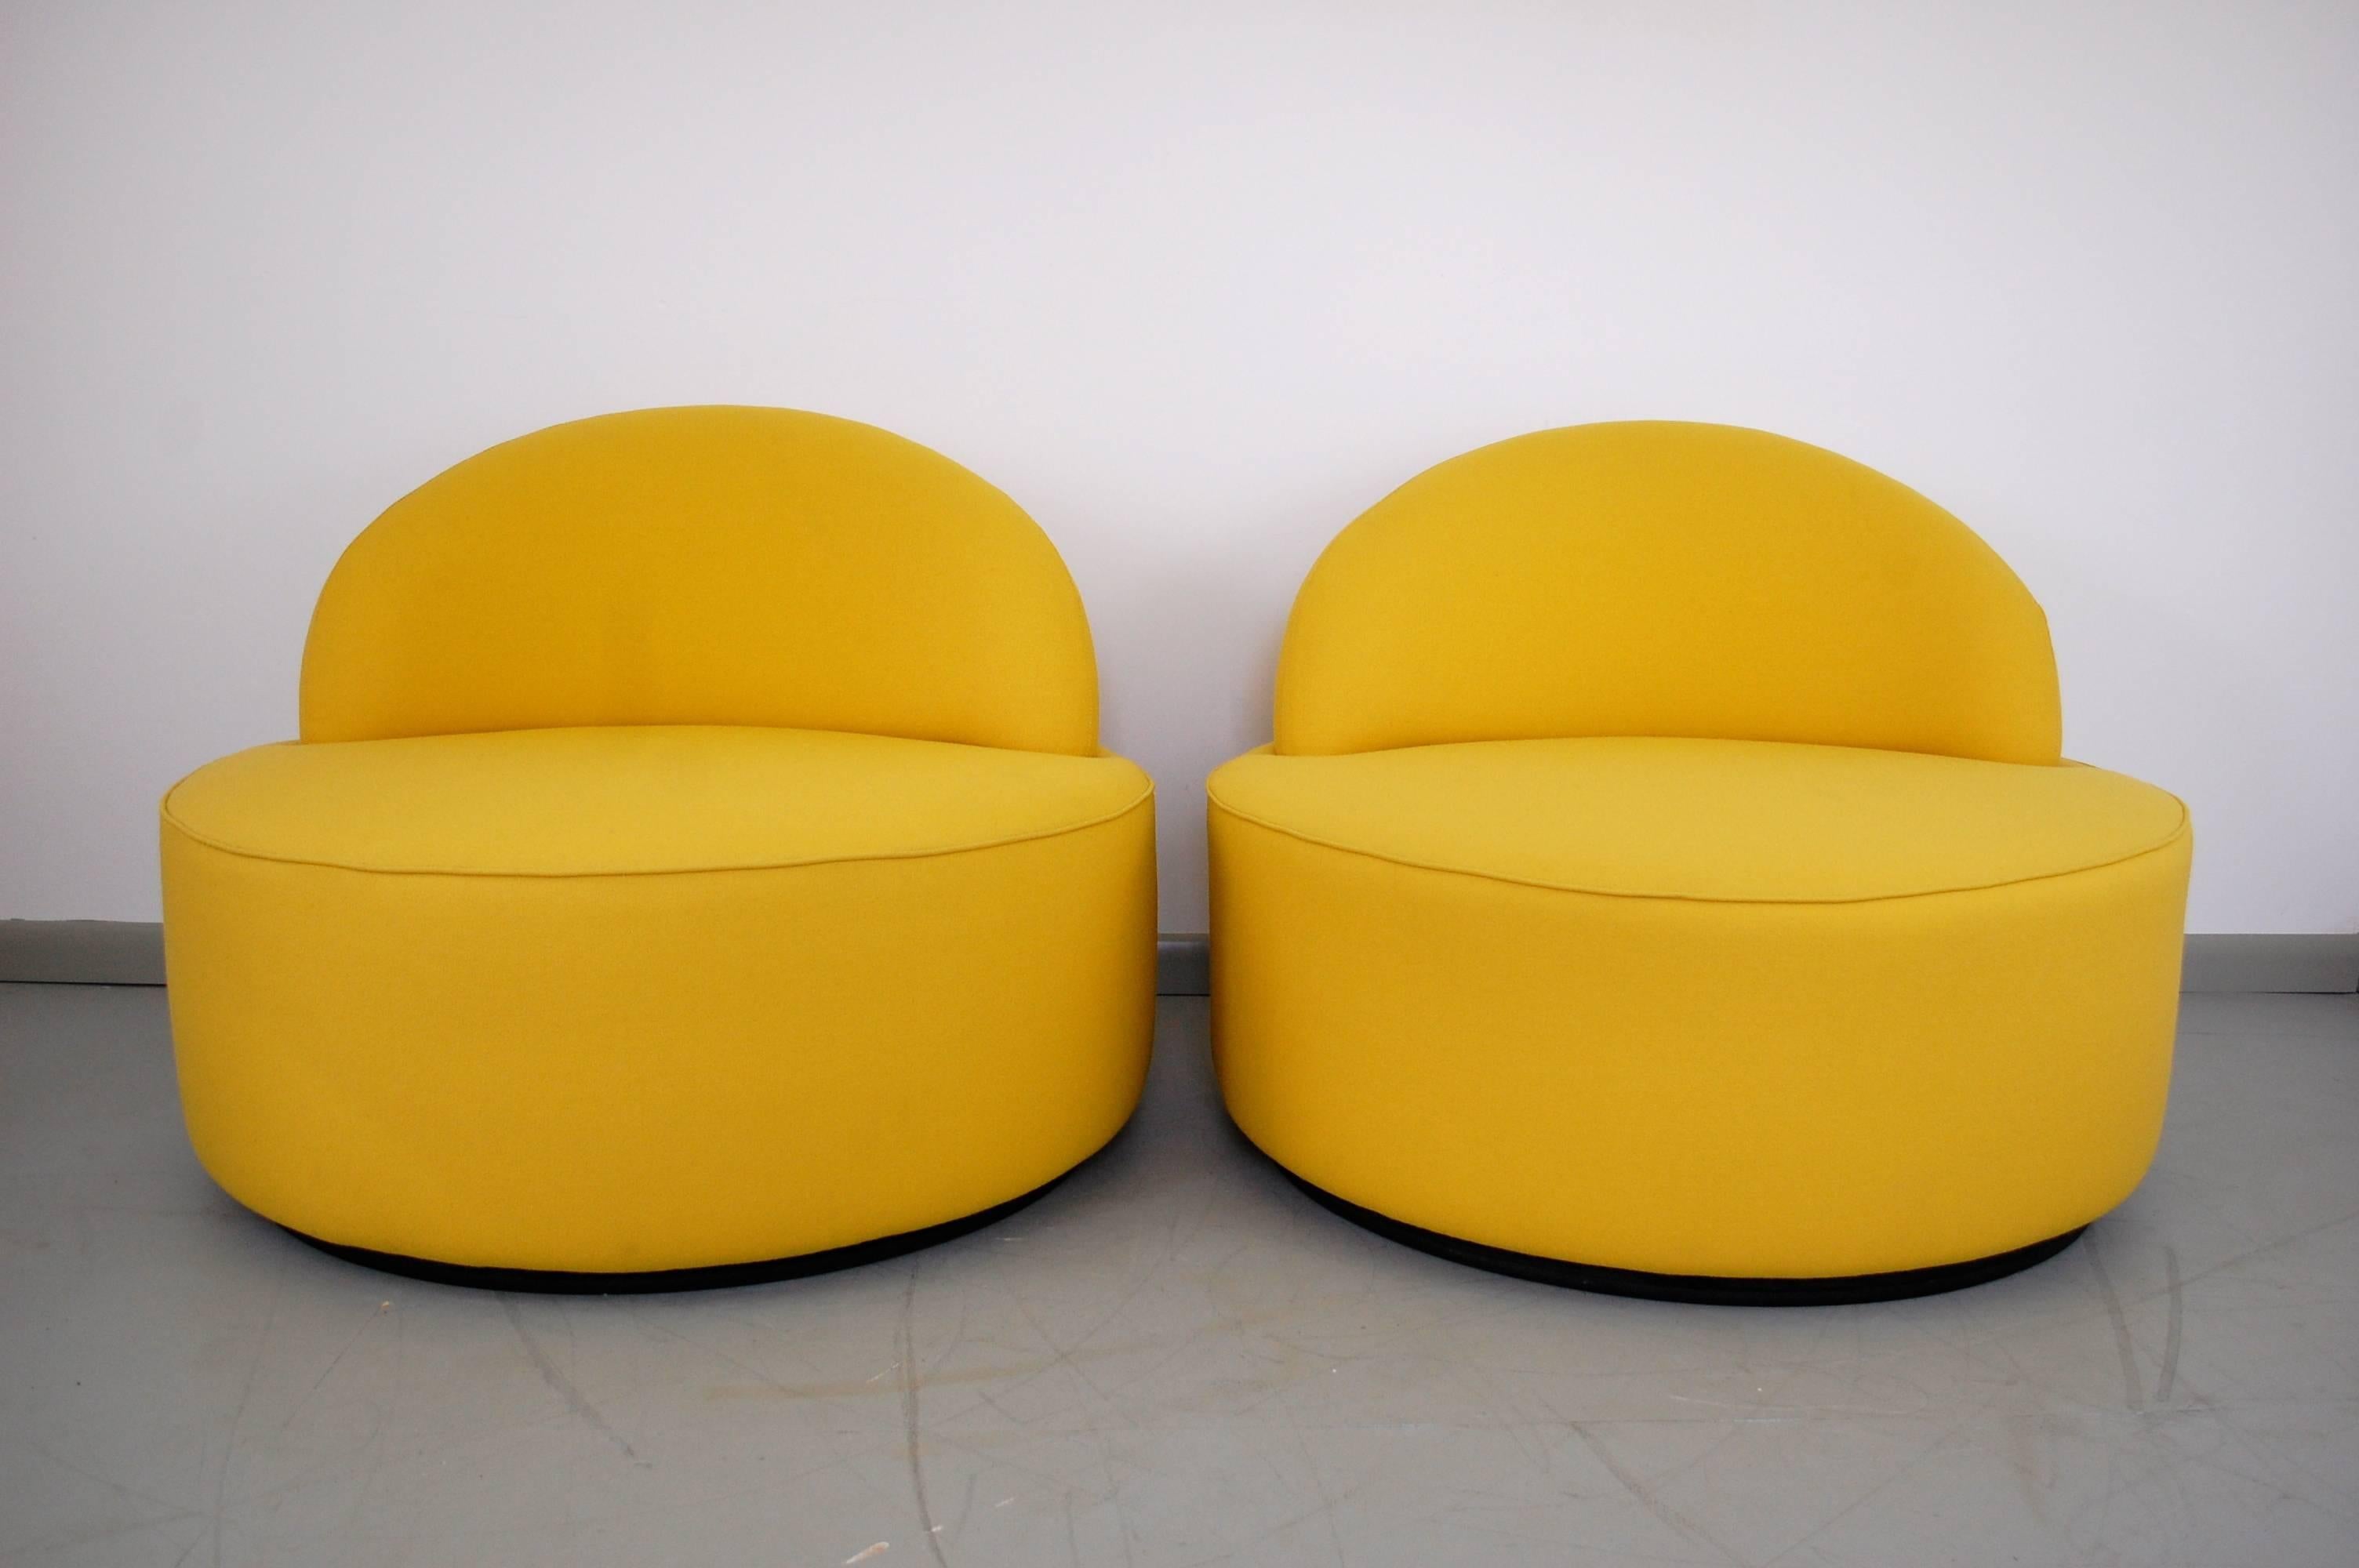 Exceptional pair of Vladimir Kagan "Comete" lounge chairs for Roche Bobois, circa 2003. One of the rarest Kagan designs on the market, the comfort and quality are remarkable. Chairs are upholstered in the original vibrant yellow fabric